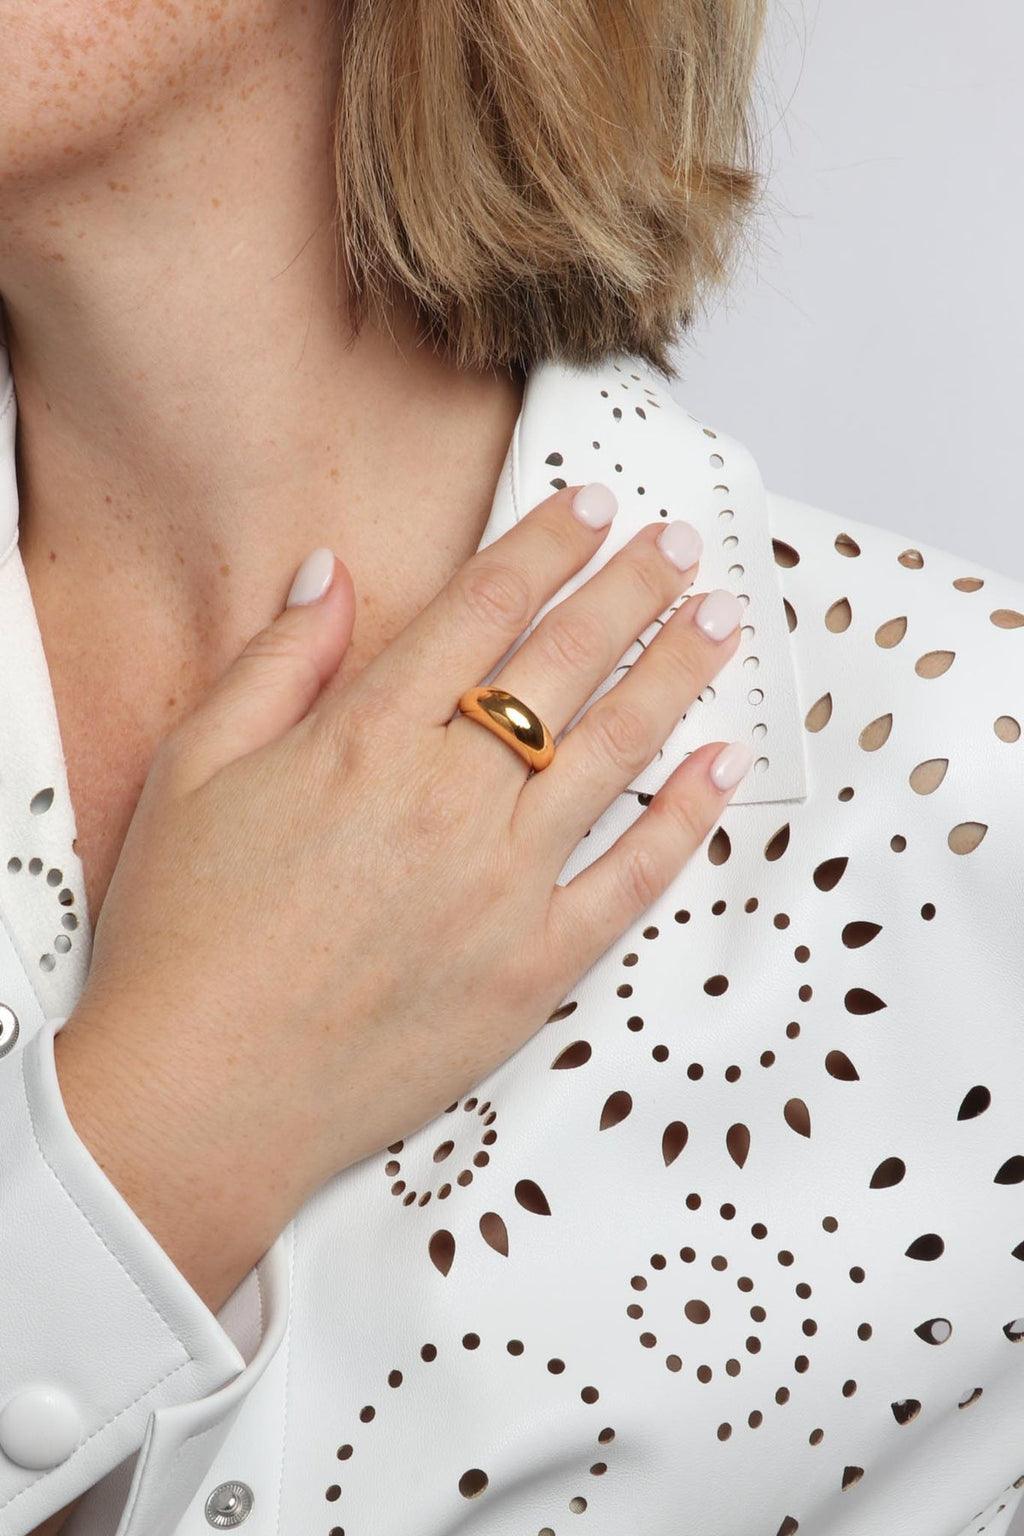 Marrin Costello Jewelry - Layla Ring - Gold